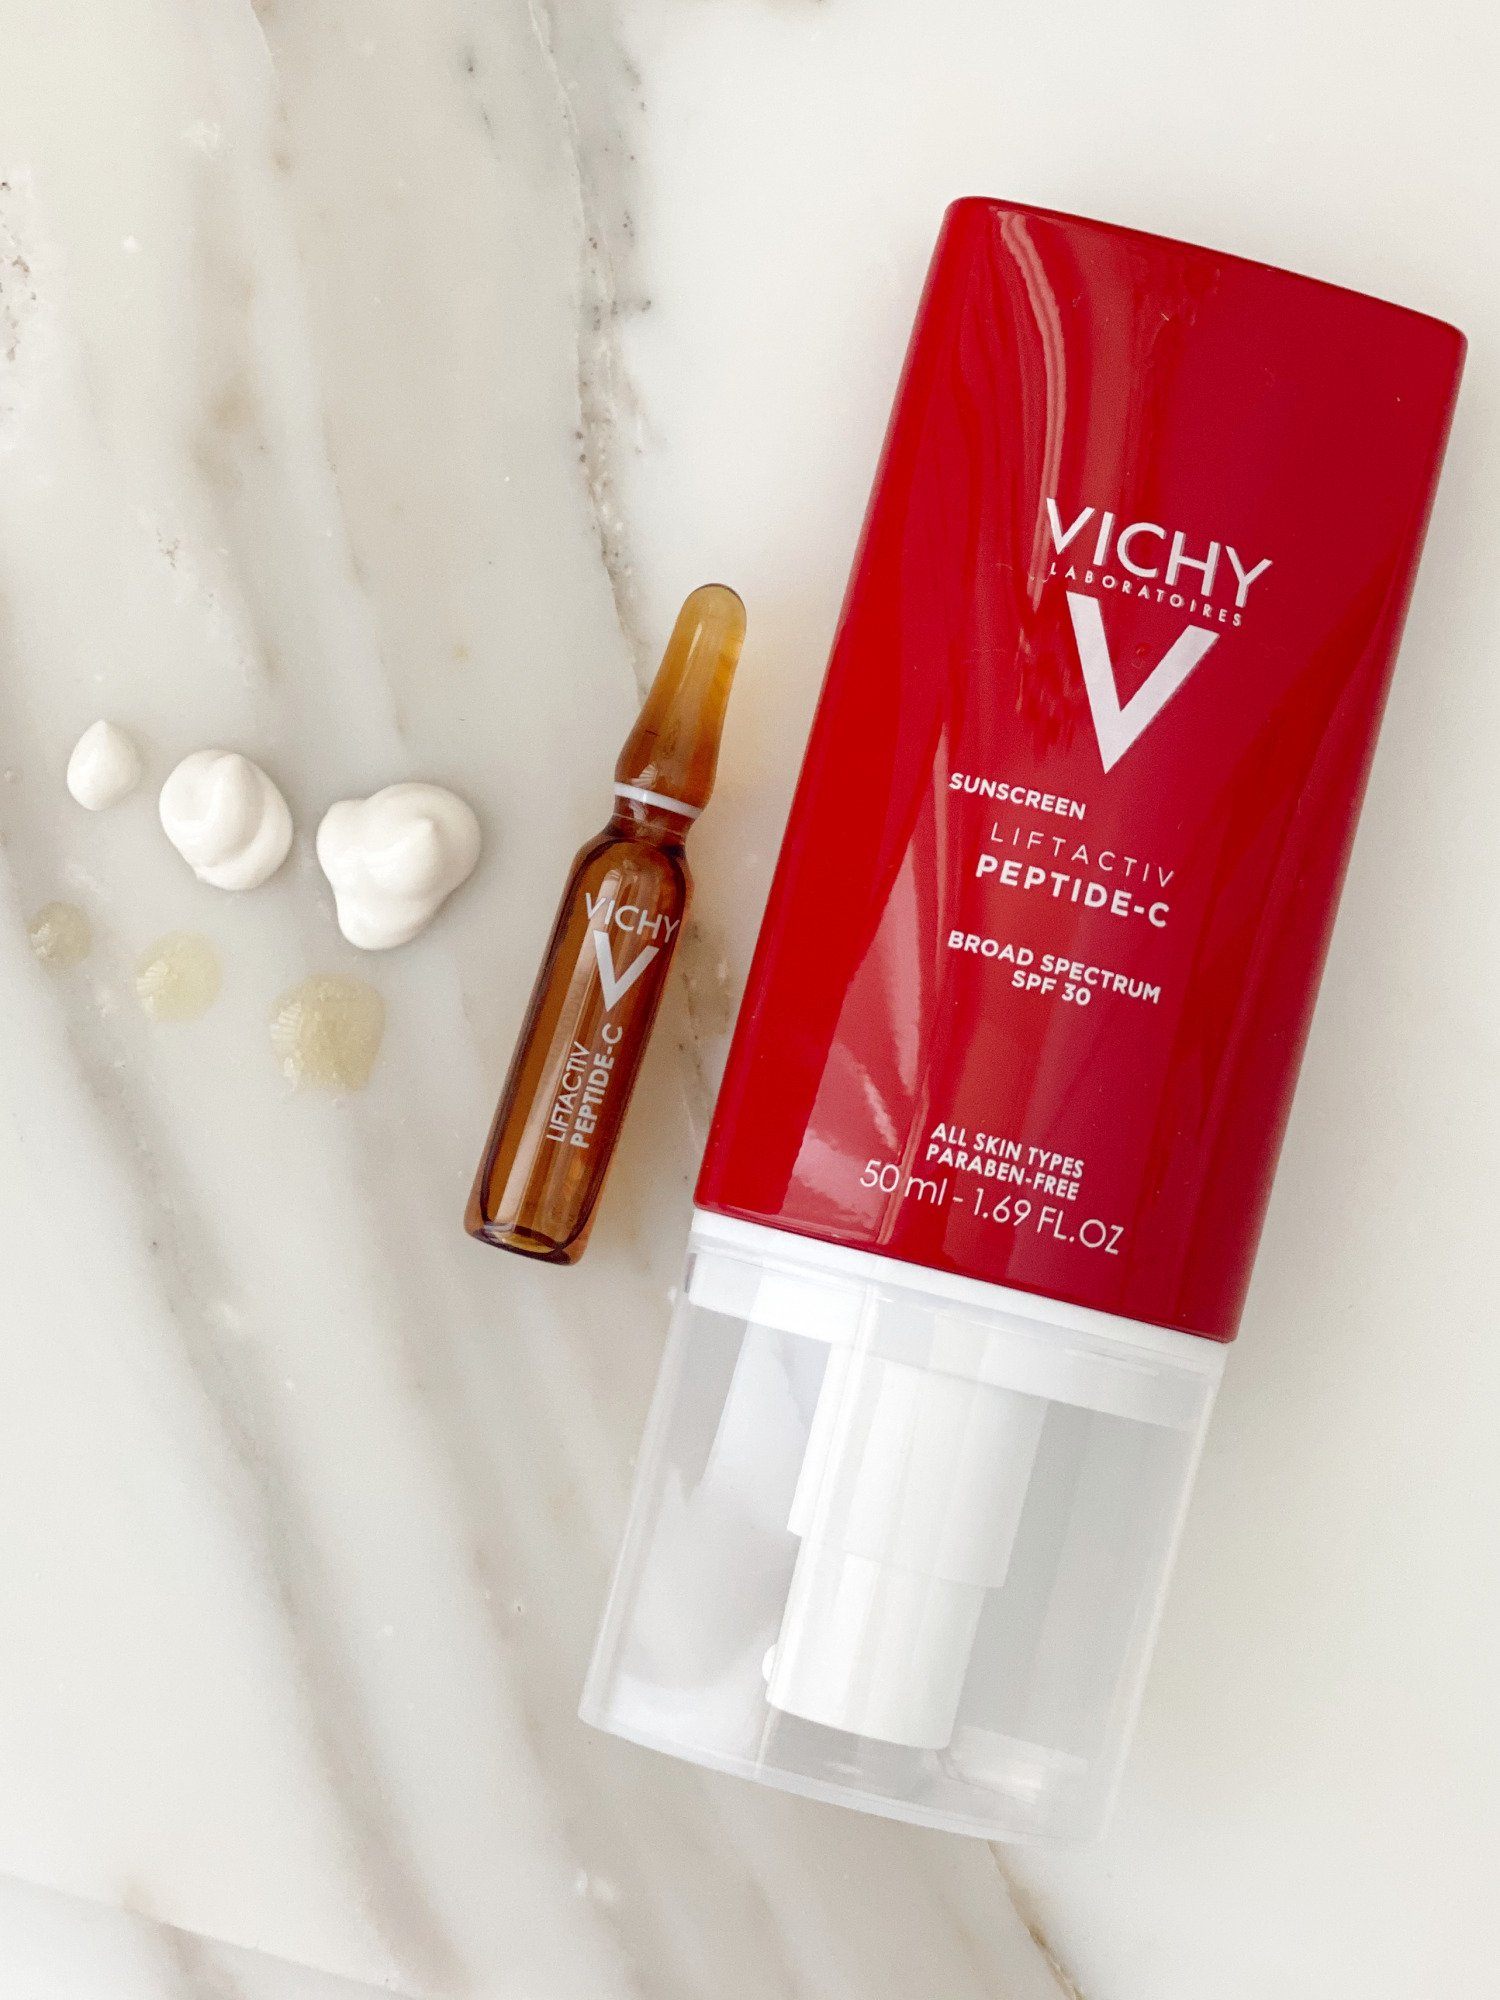 Two Must-Have Products that Fight Aging...